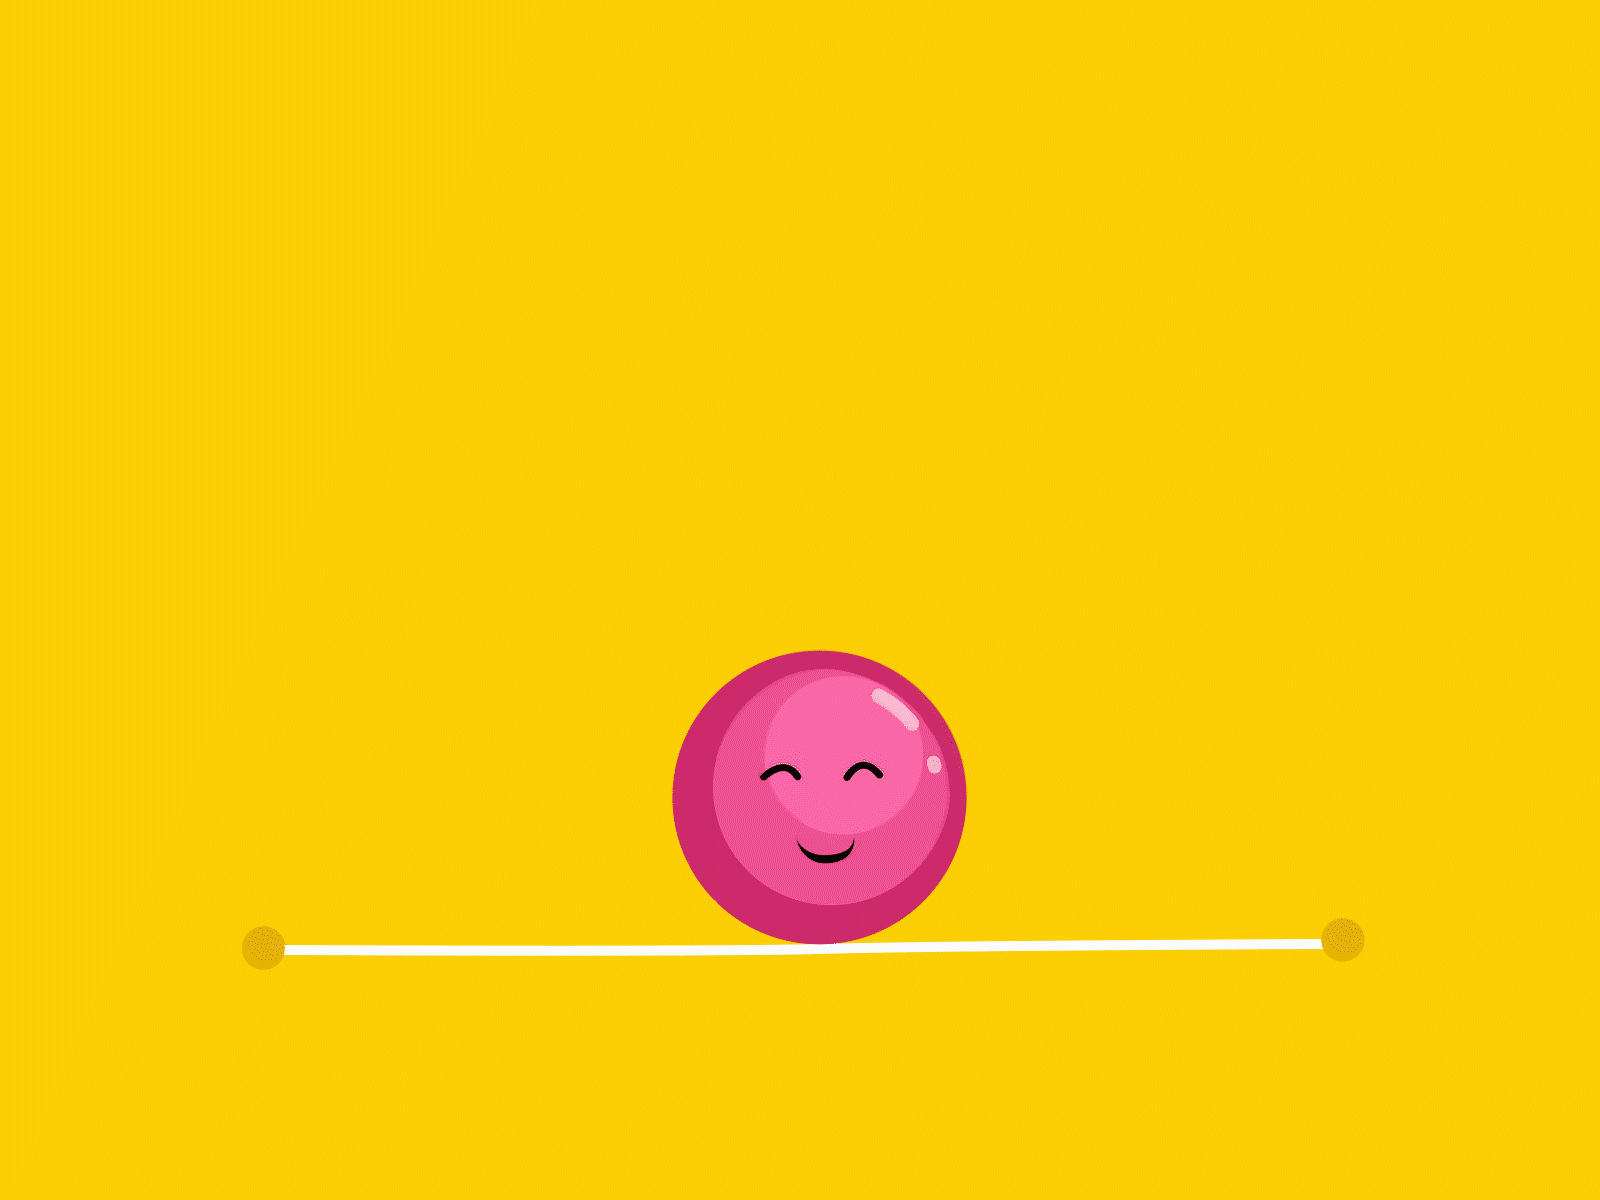 Ball after effects animation ball illustration squash and stretch